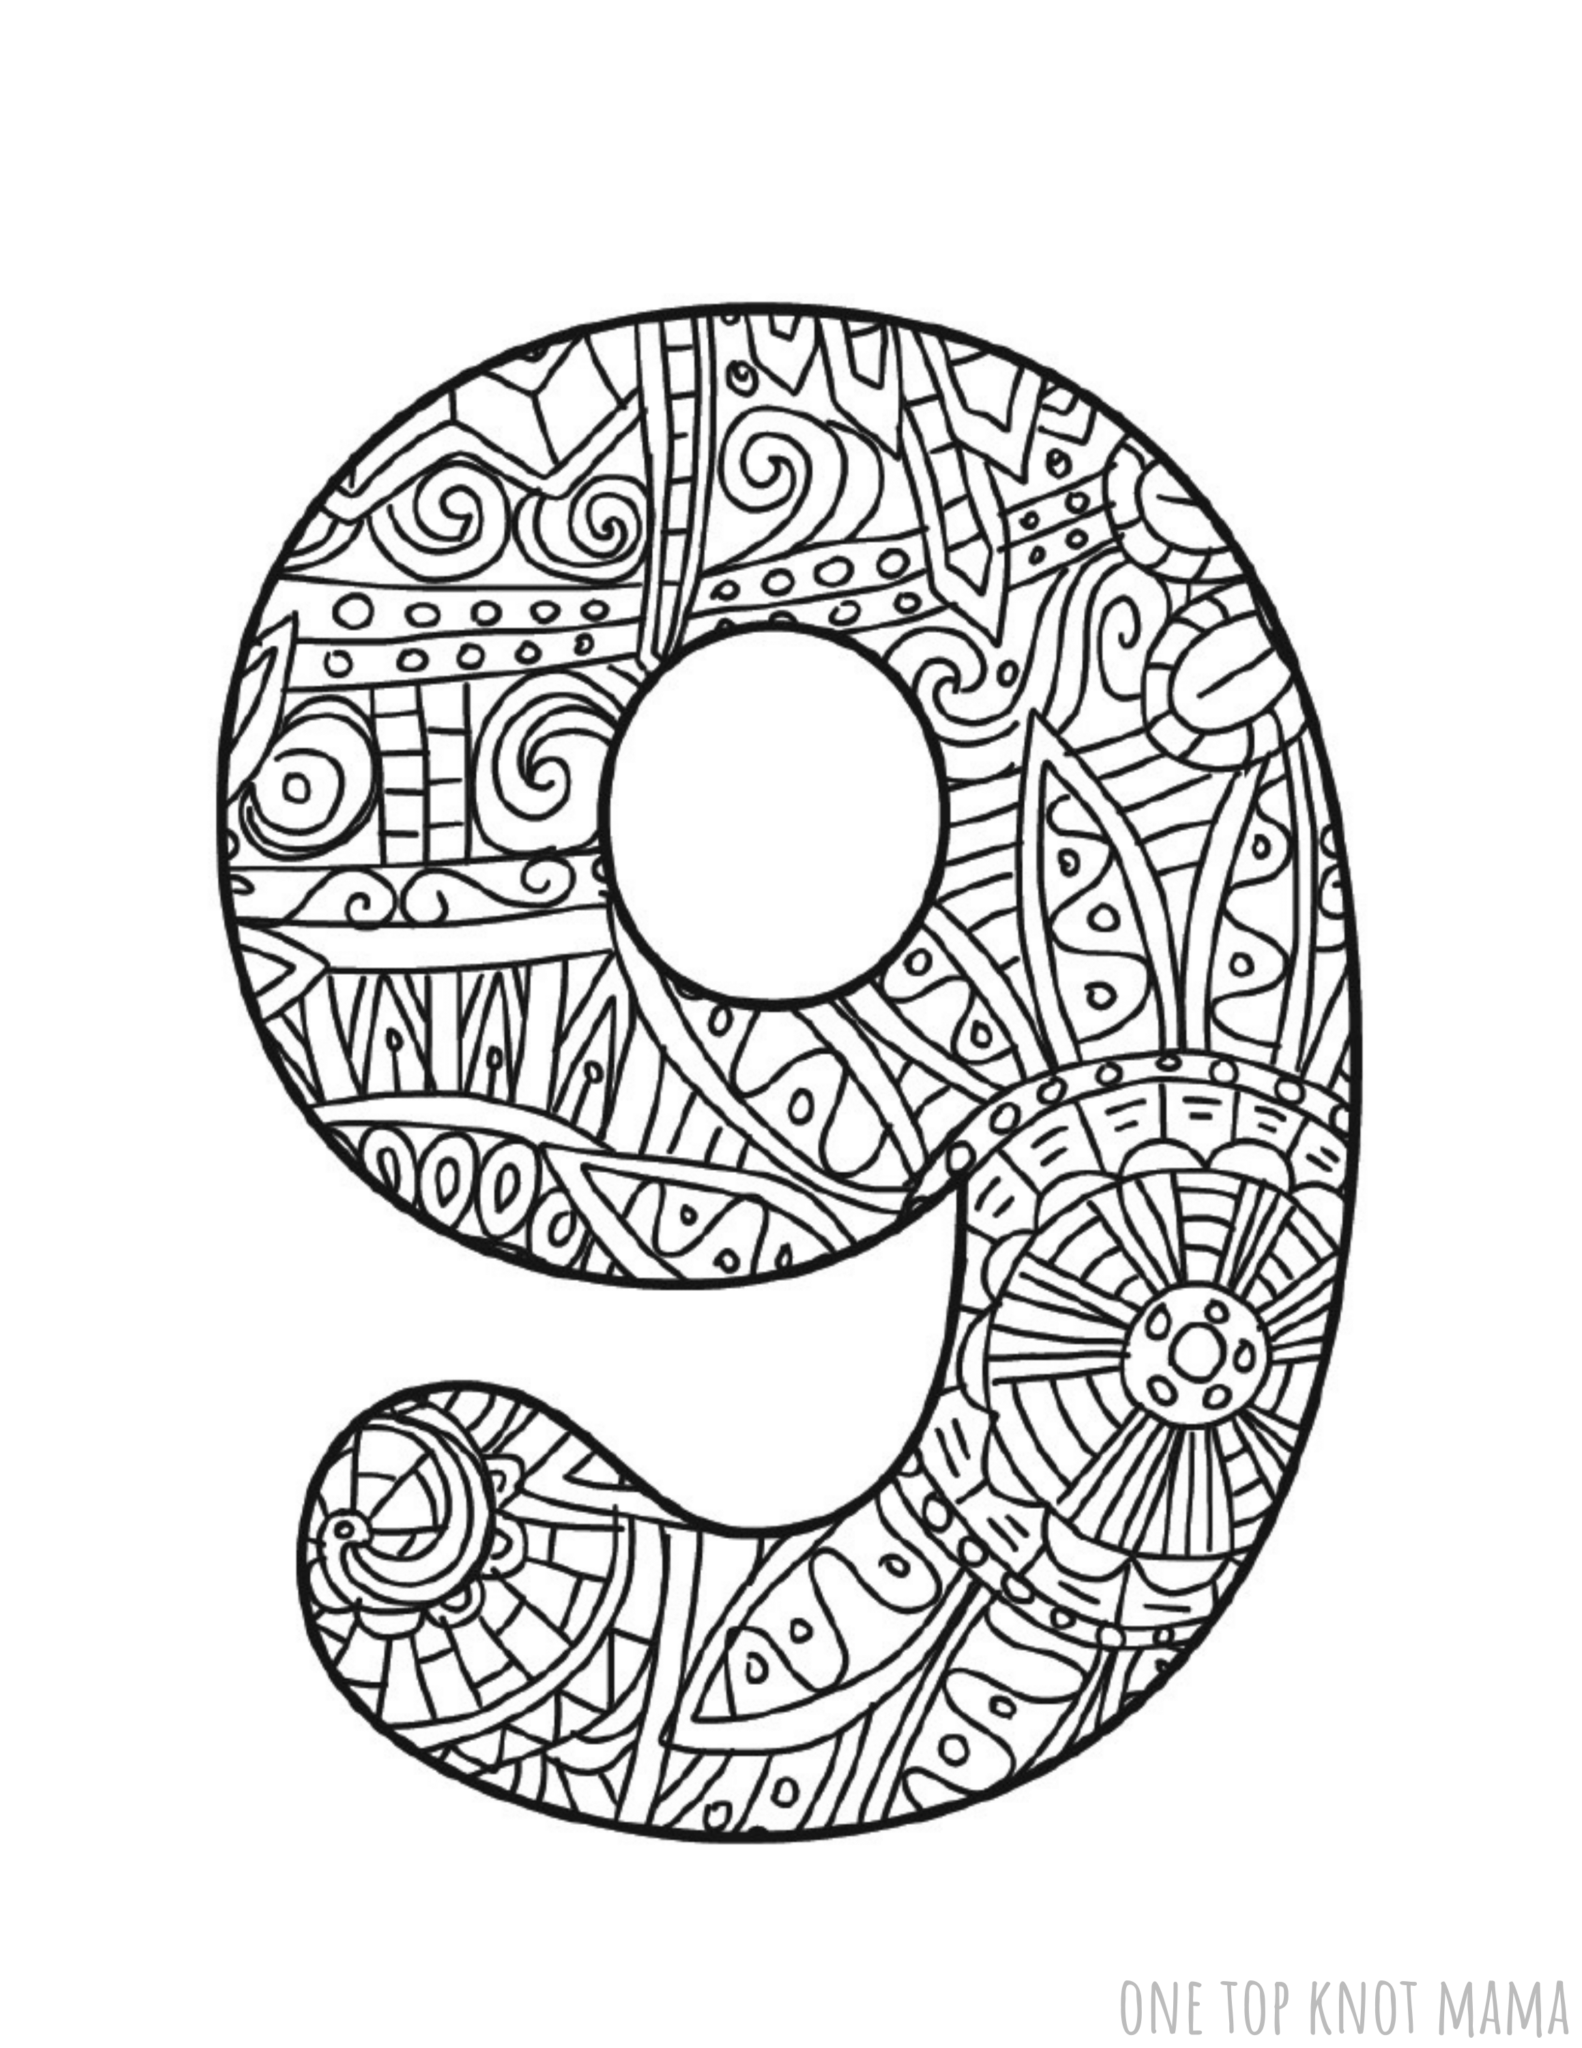 Free Coloring Pages Numbers 1-9 ⋆ One Top Knot Mama